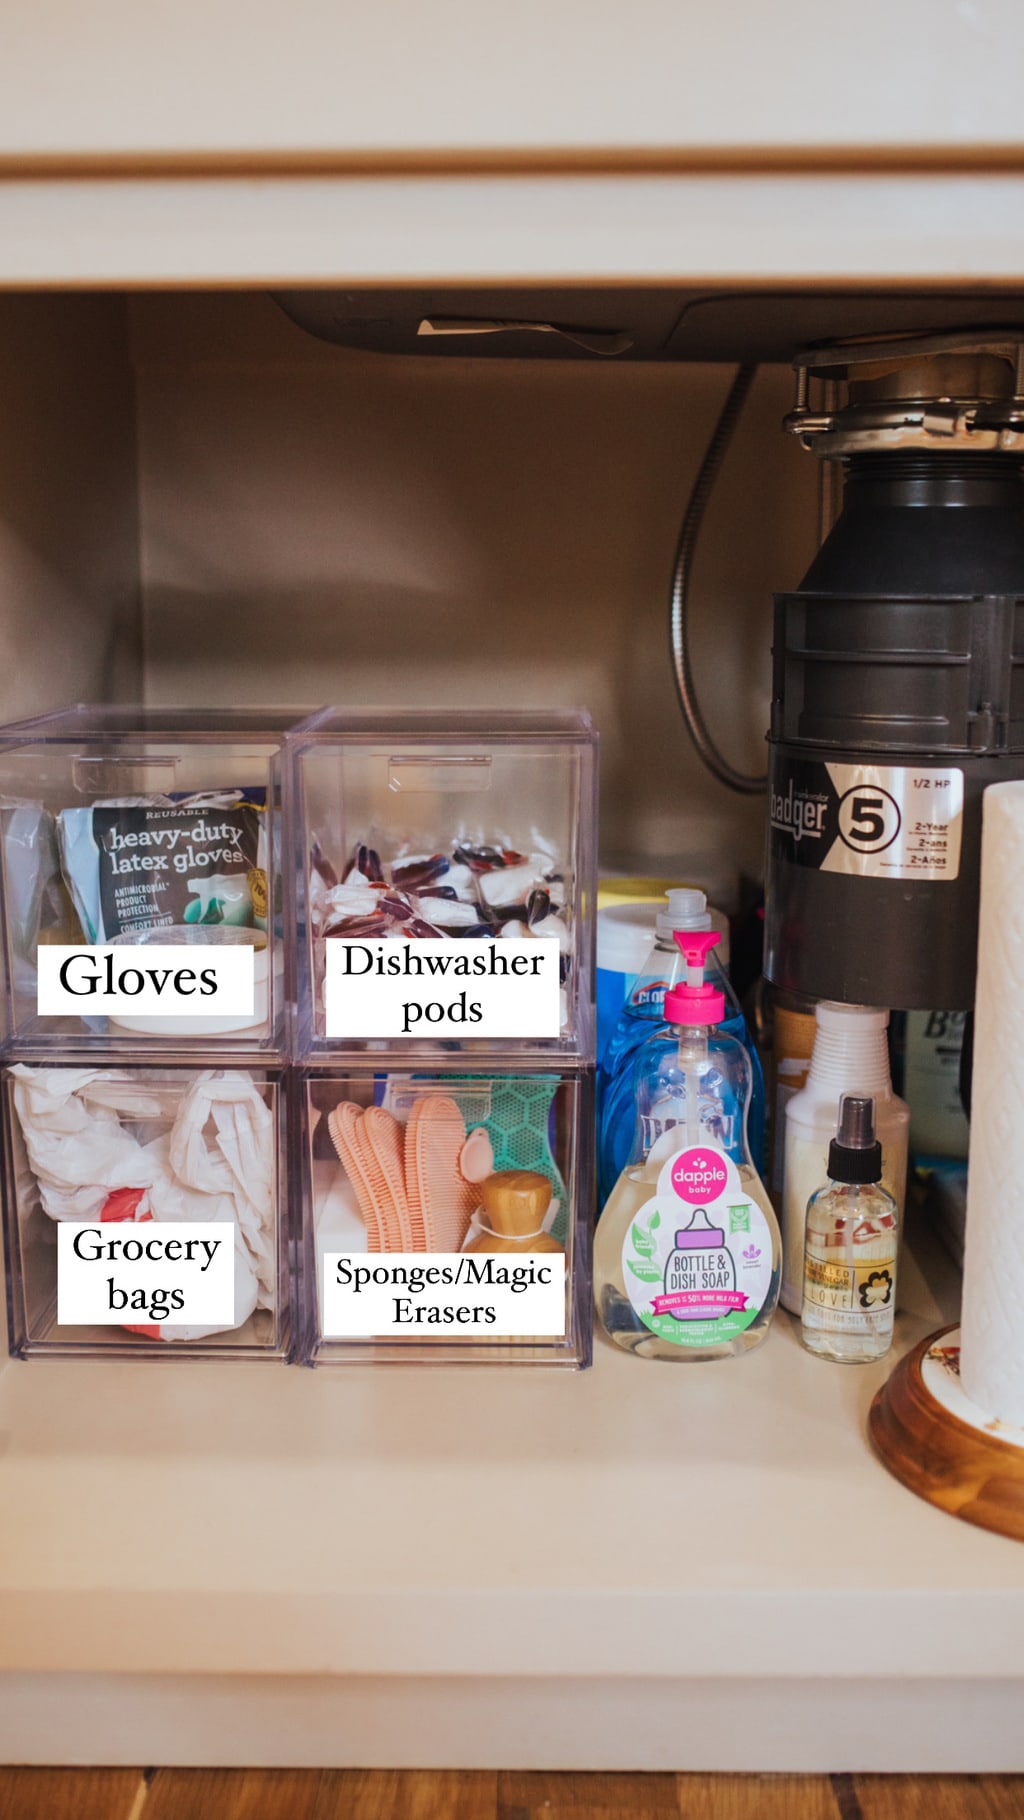 Under the Sink Organization: Before and After! - unOriginal Mom